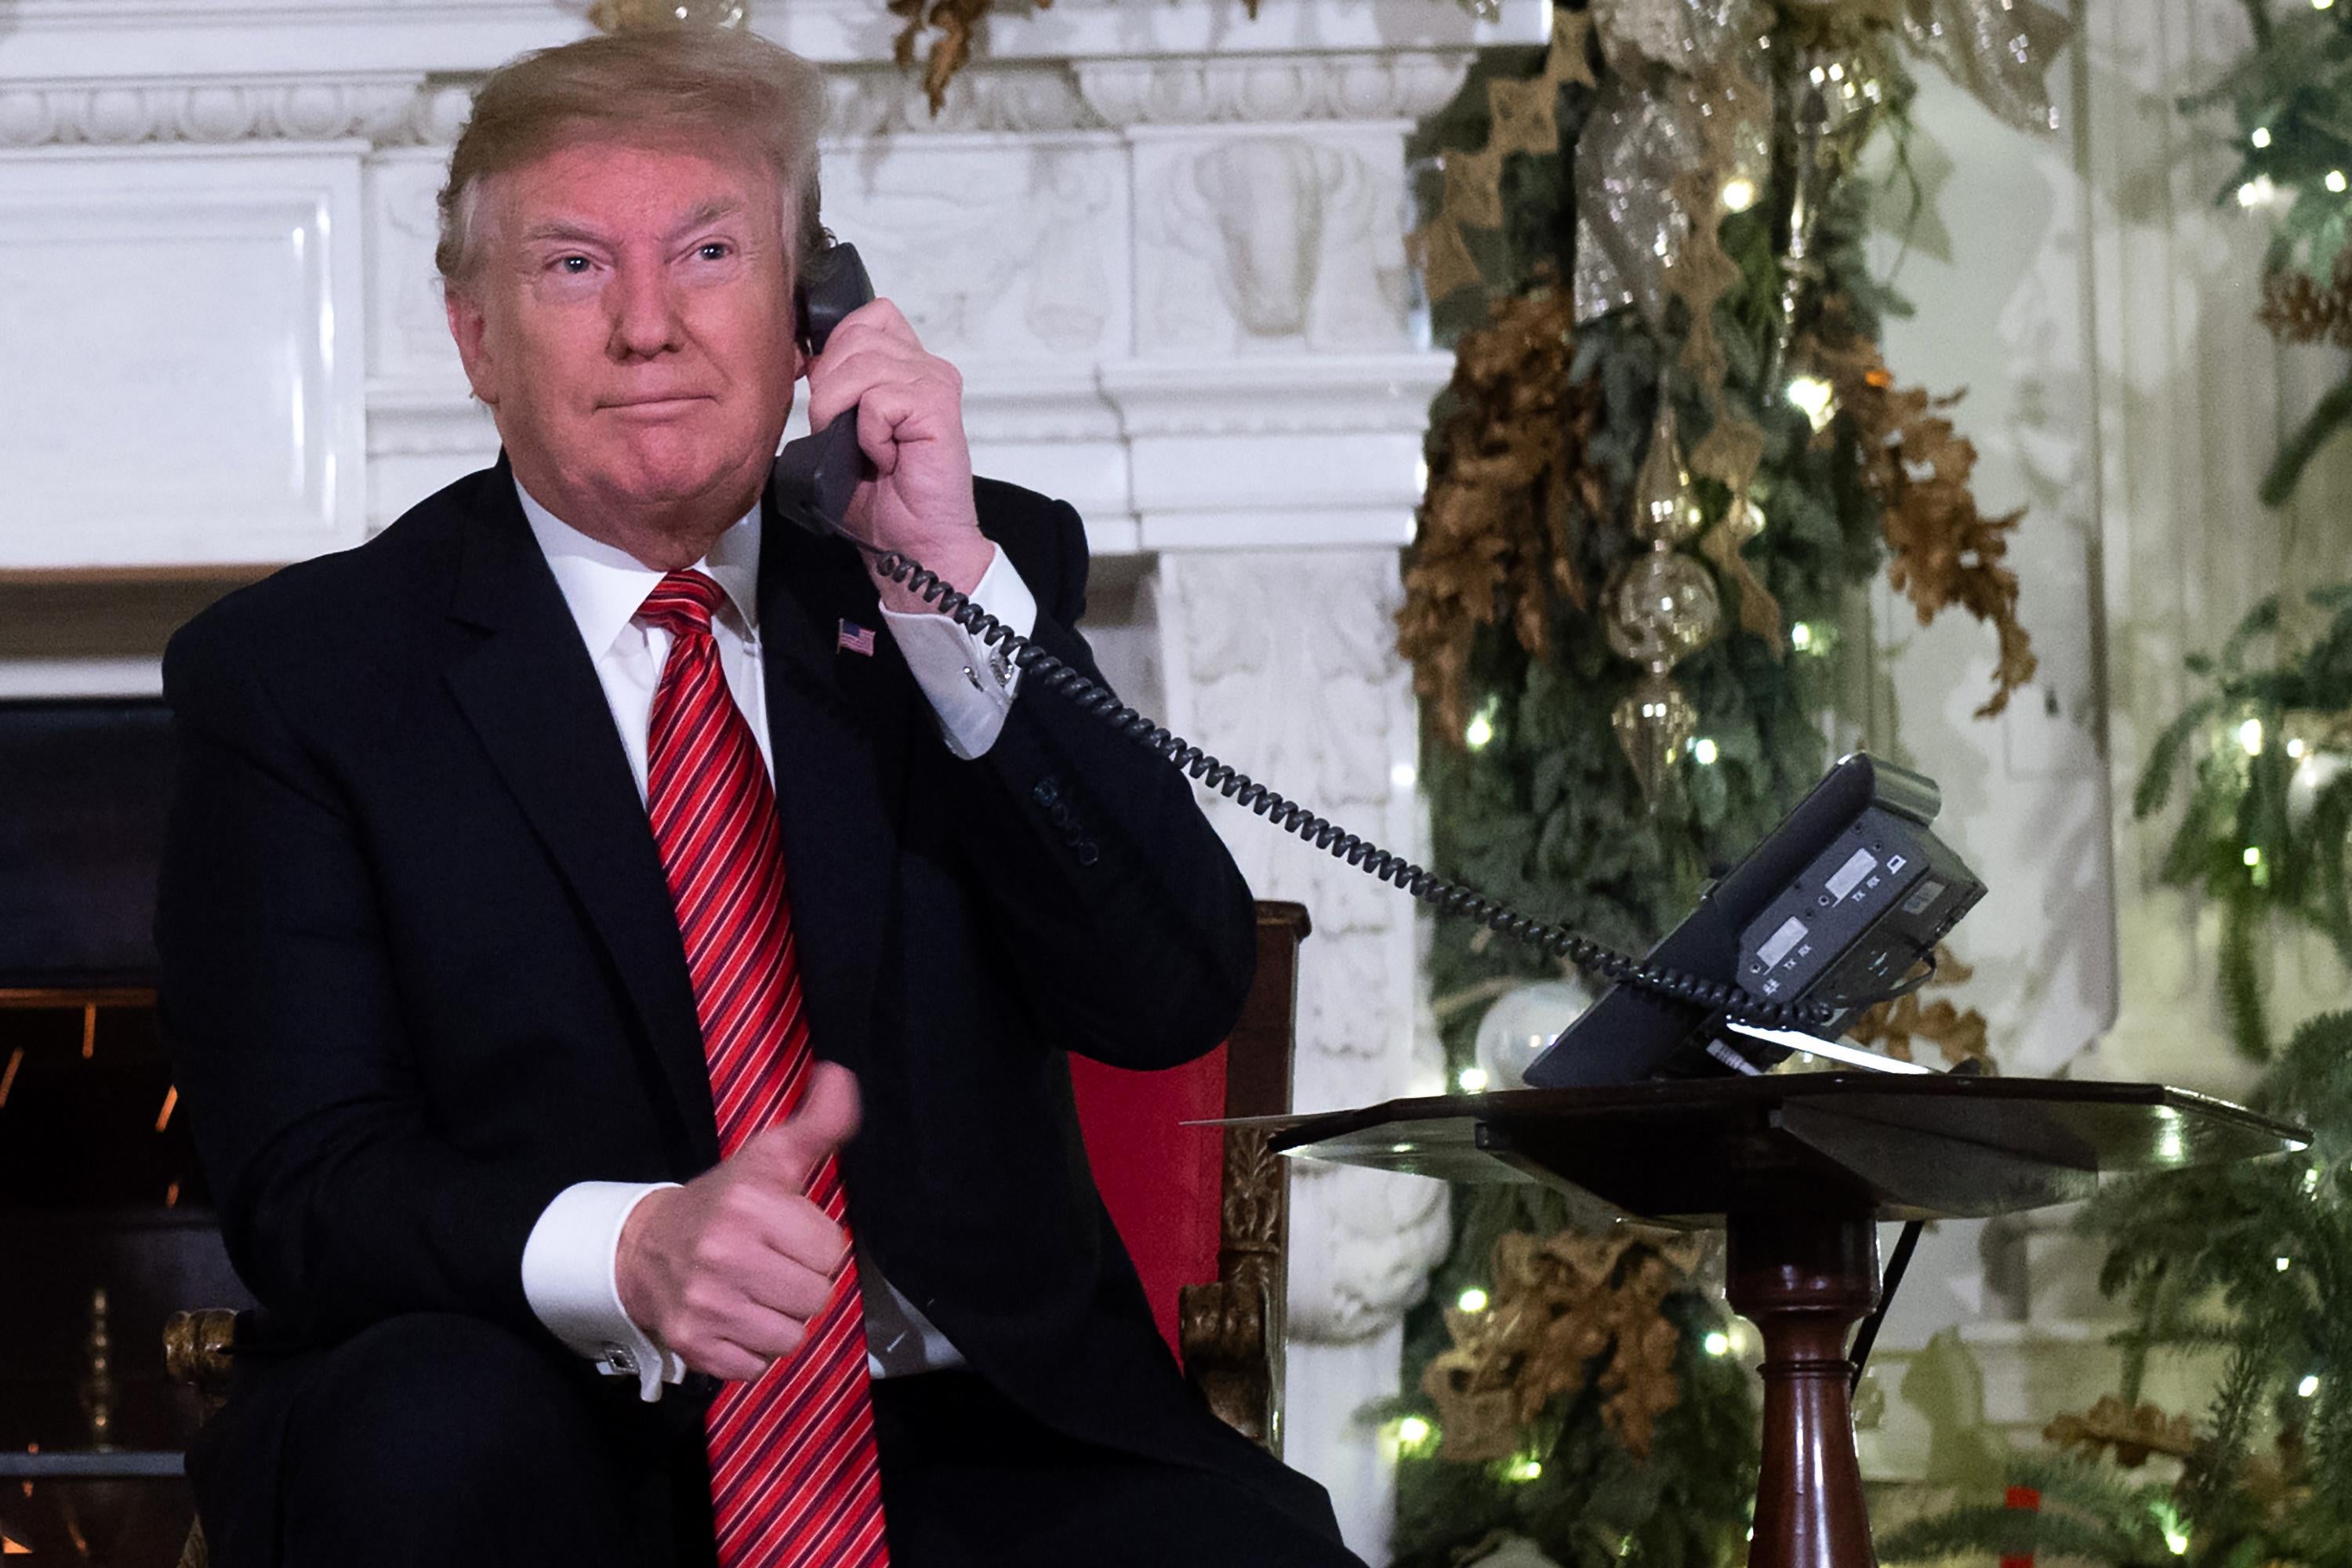 President Donald Trump speaks on the telephone as he answers calls from people calling into the NORAD Santa tracker phone line in the State Dining Room of the White House in Washington, D.C. on December 24, 2018. 